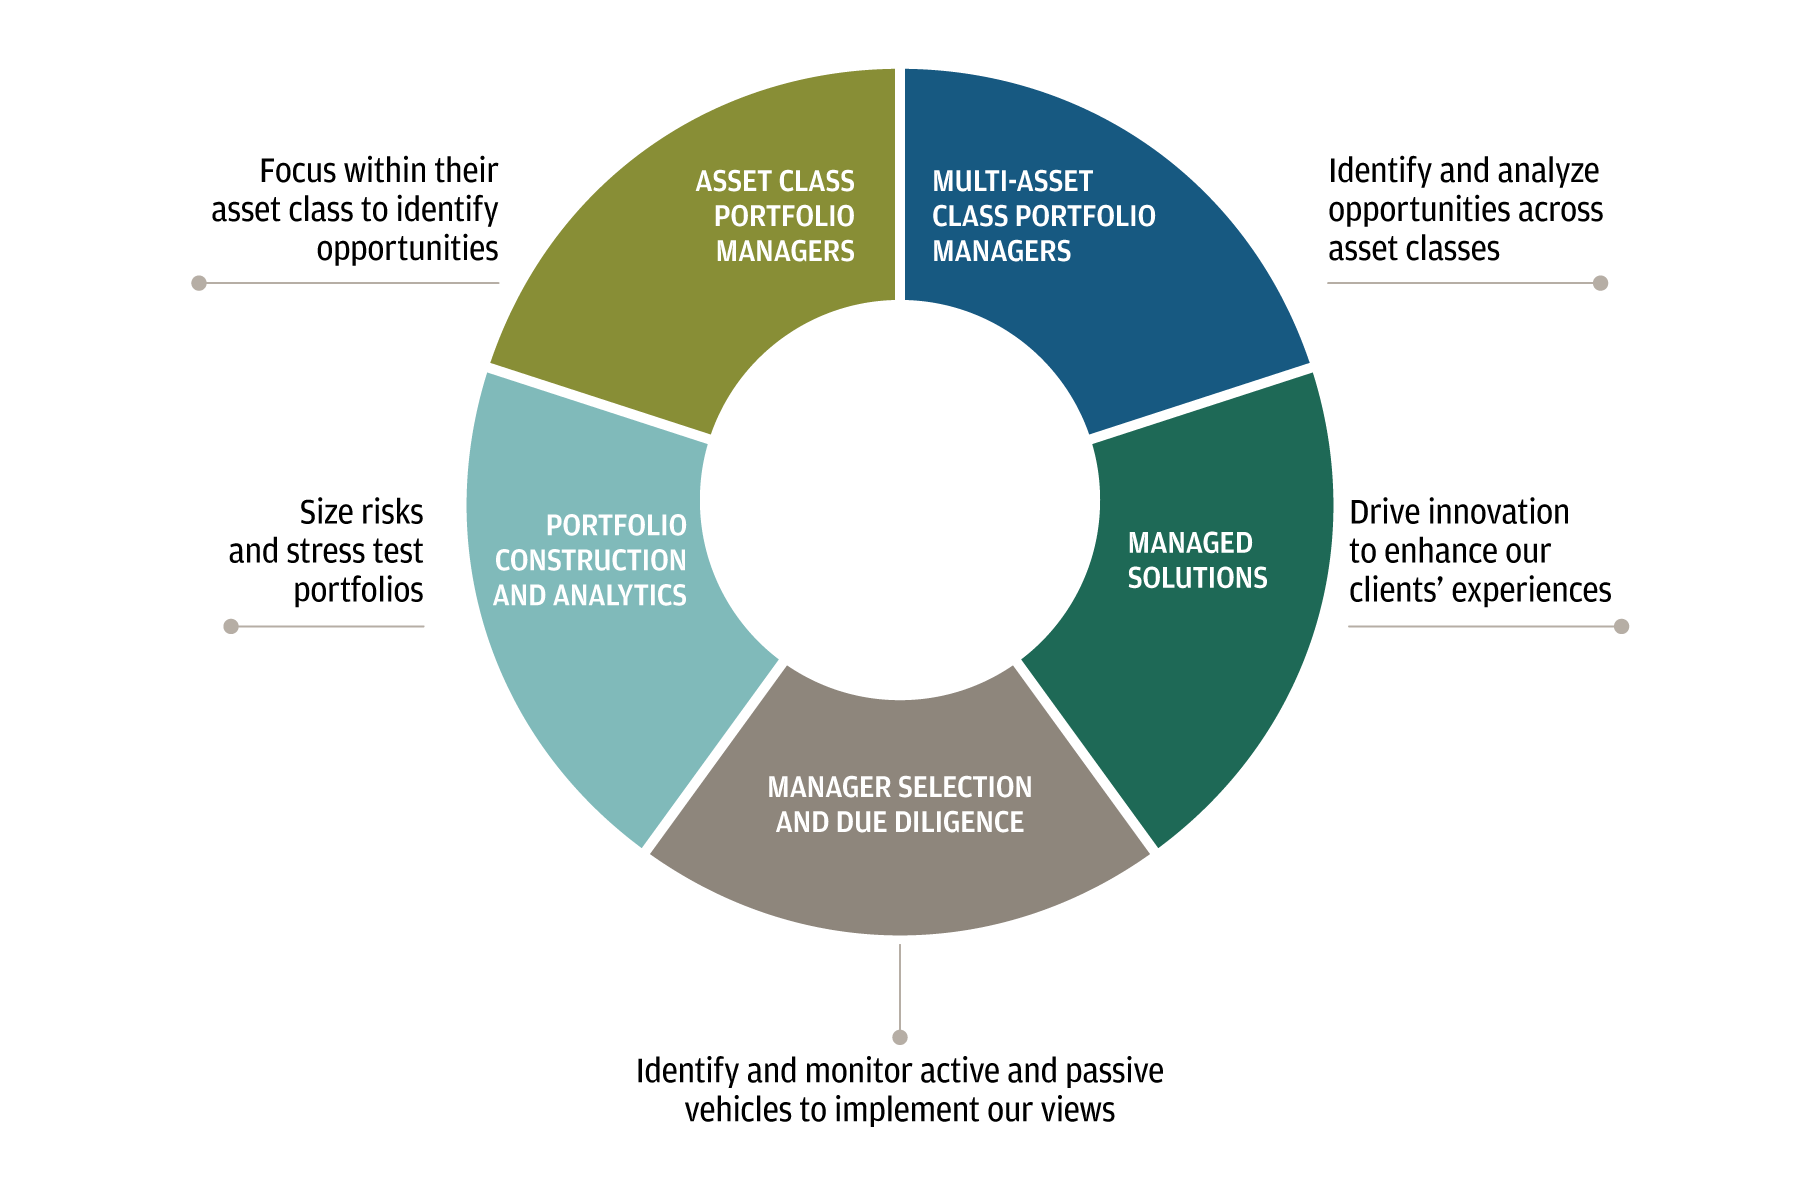 This pie chart categorizes the five elements of the portfolio construction and management process.